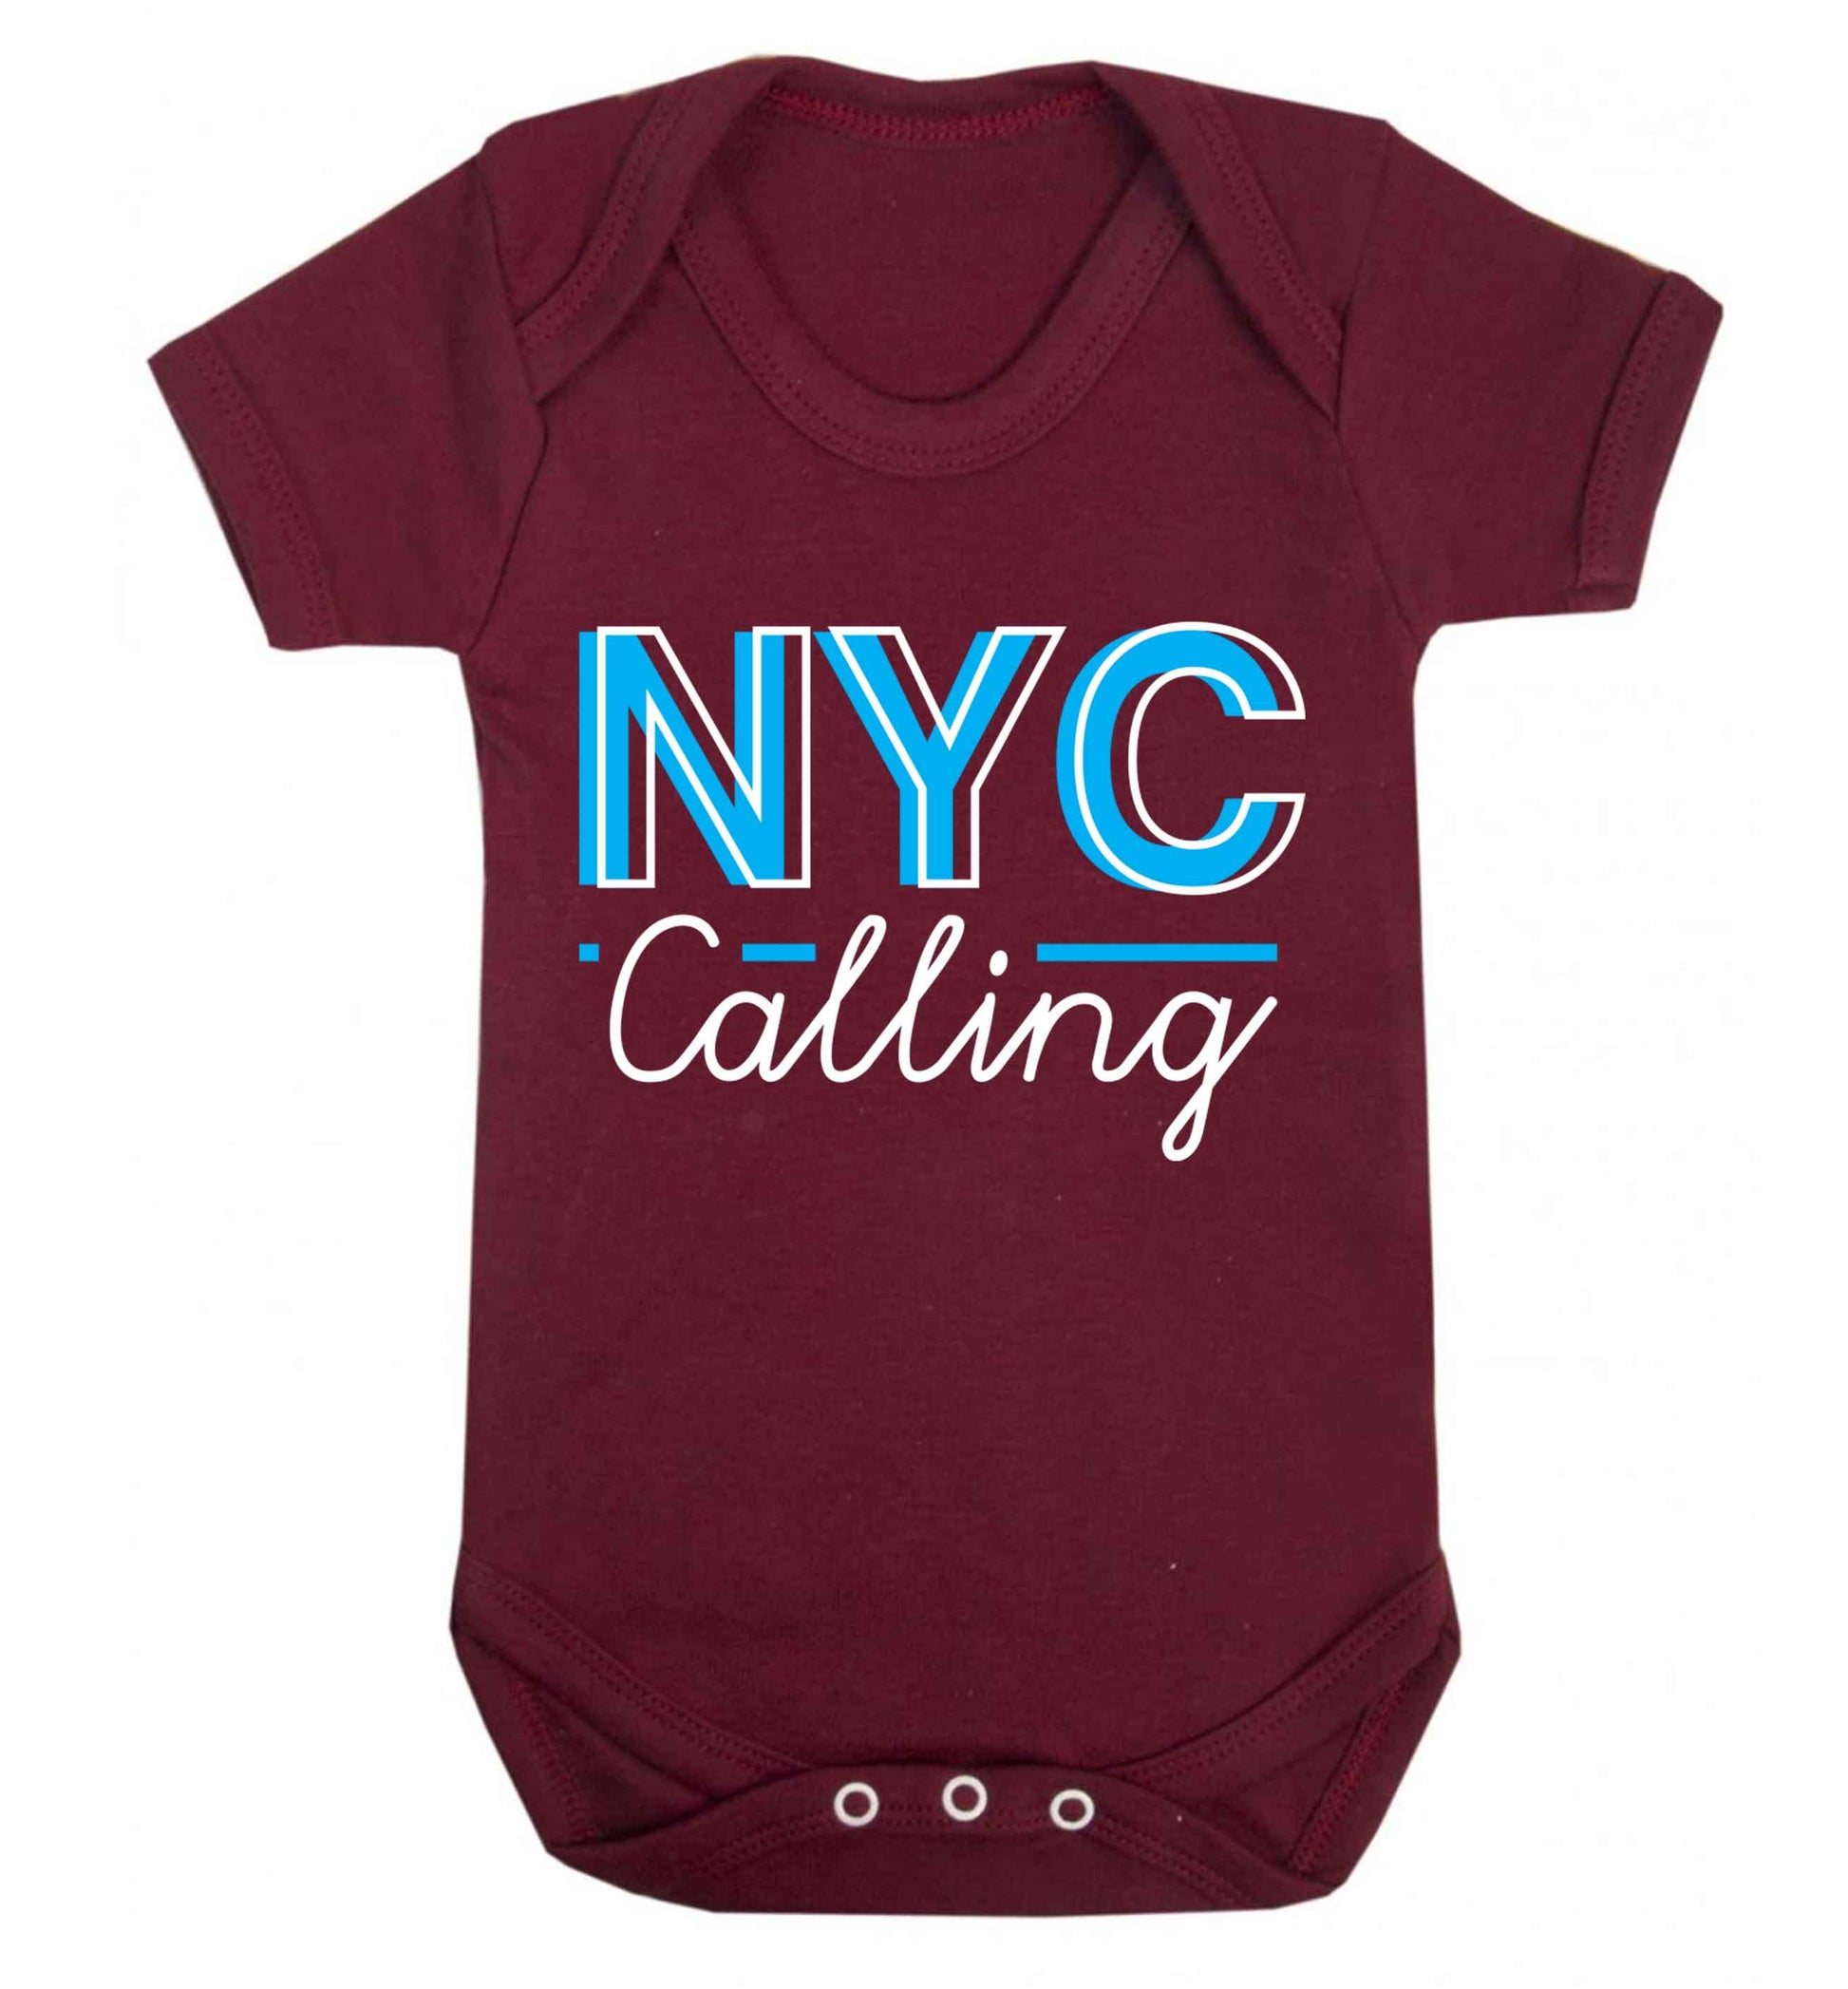 NYC calling Baby Vest maroon 18-24 months